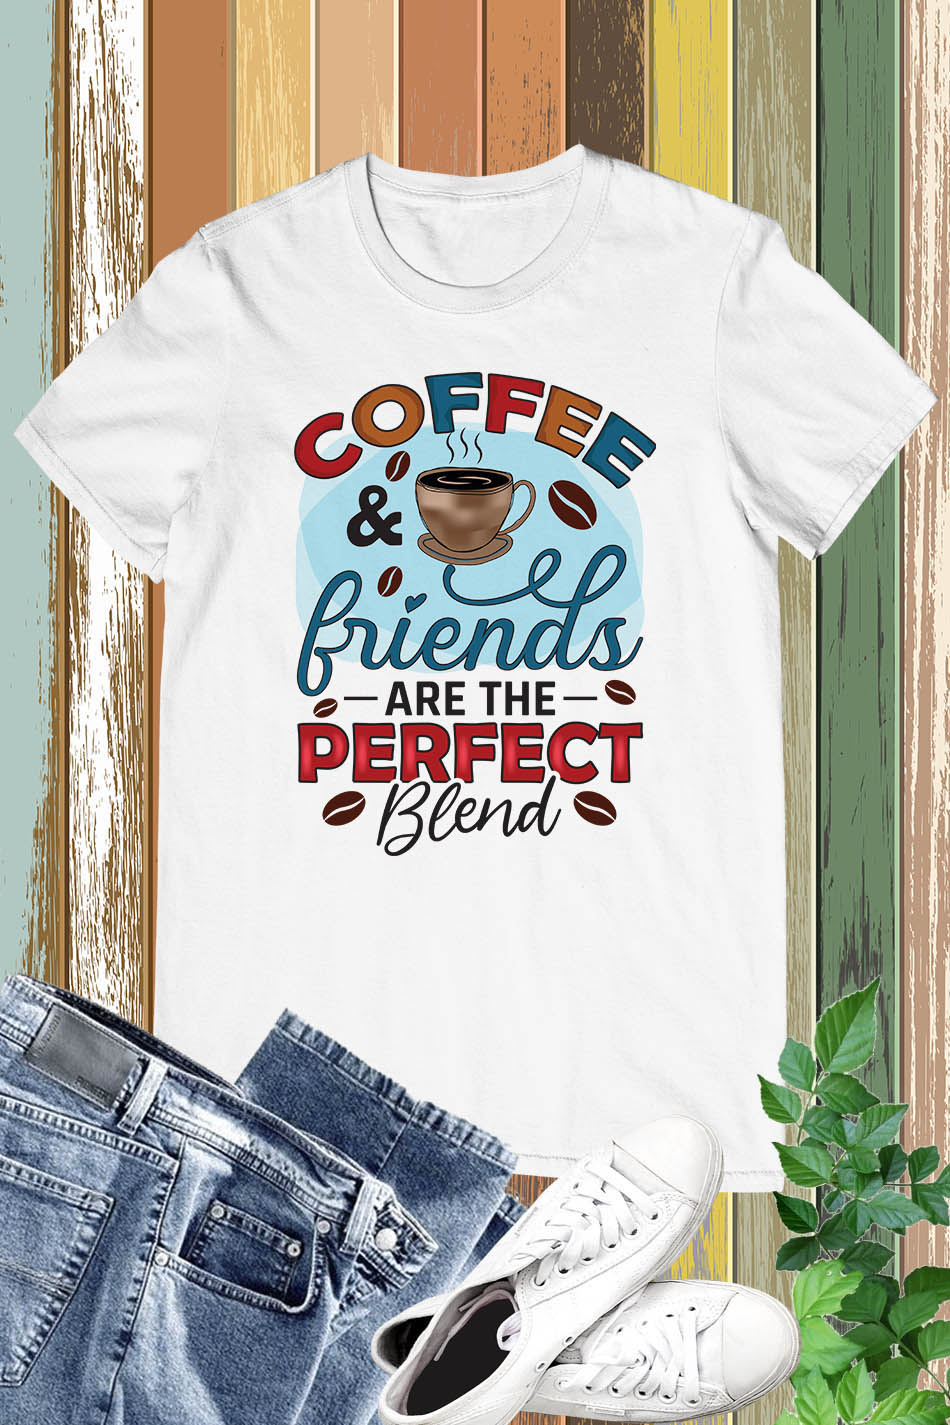 Coffee and Friend a Perfect Blend Shirt